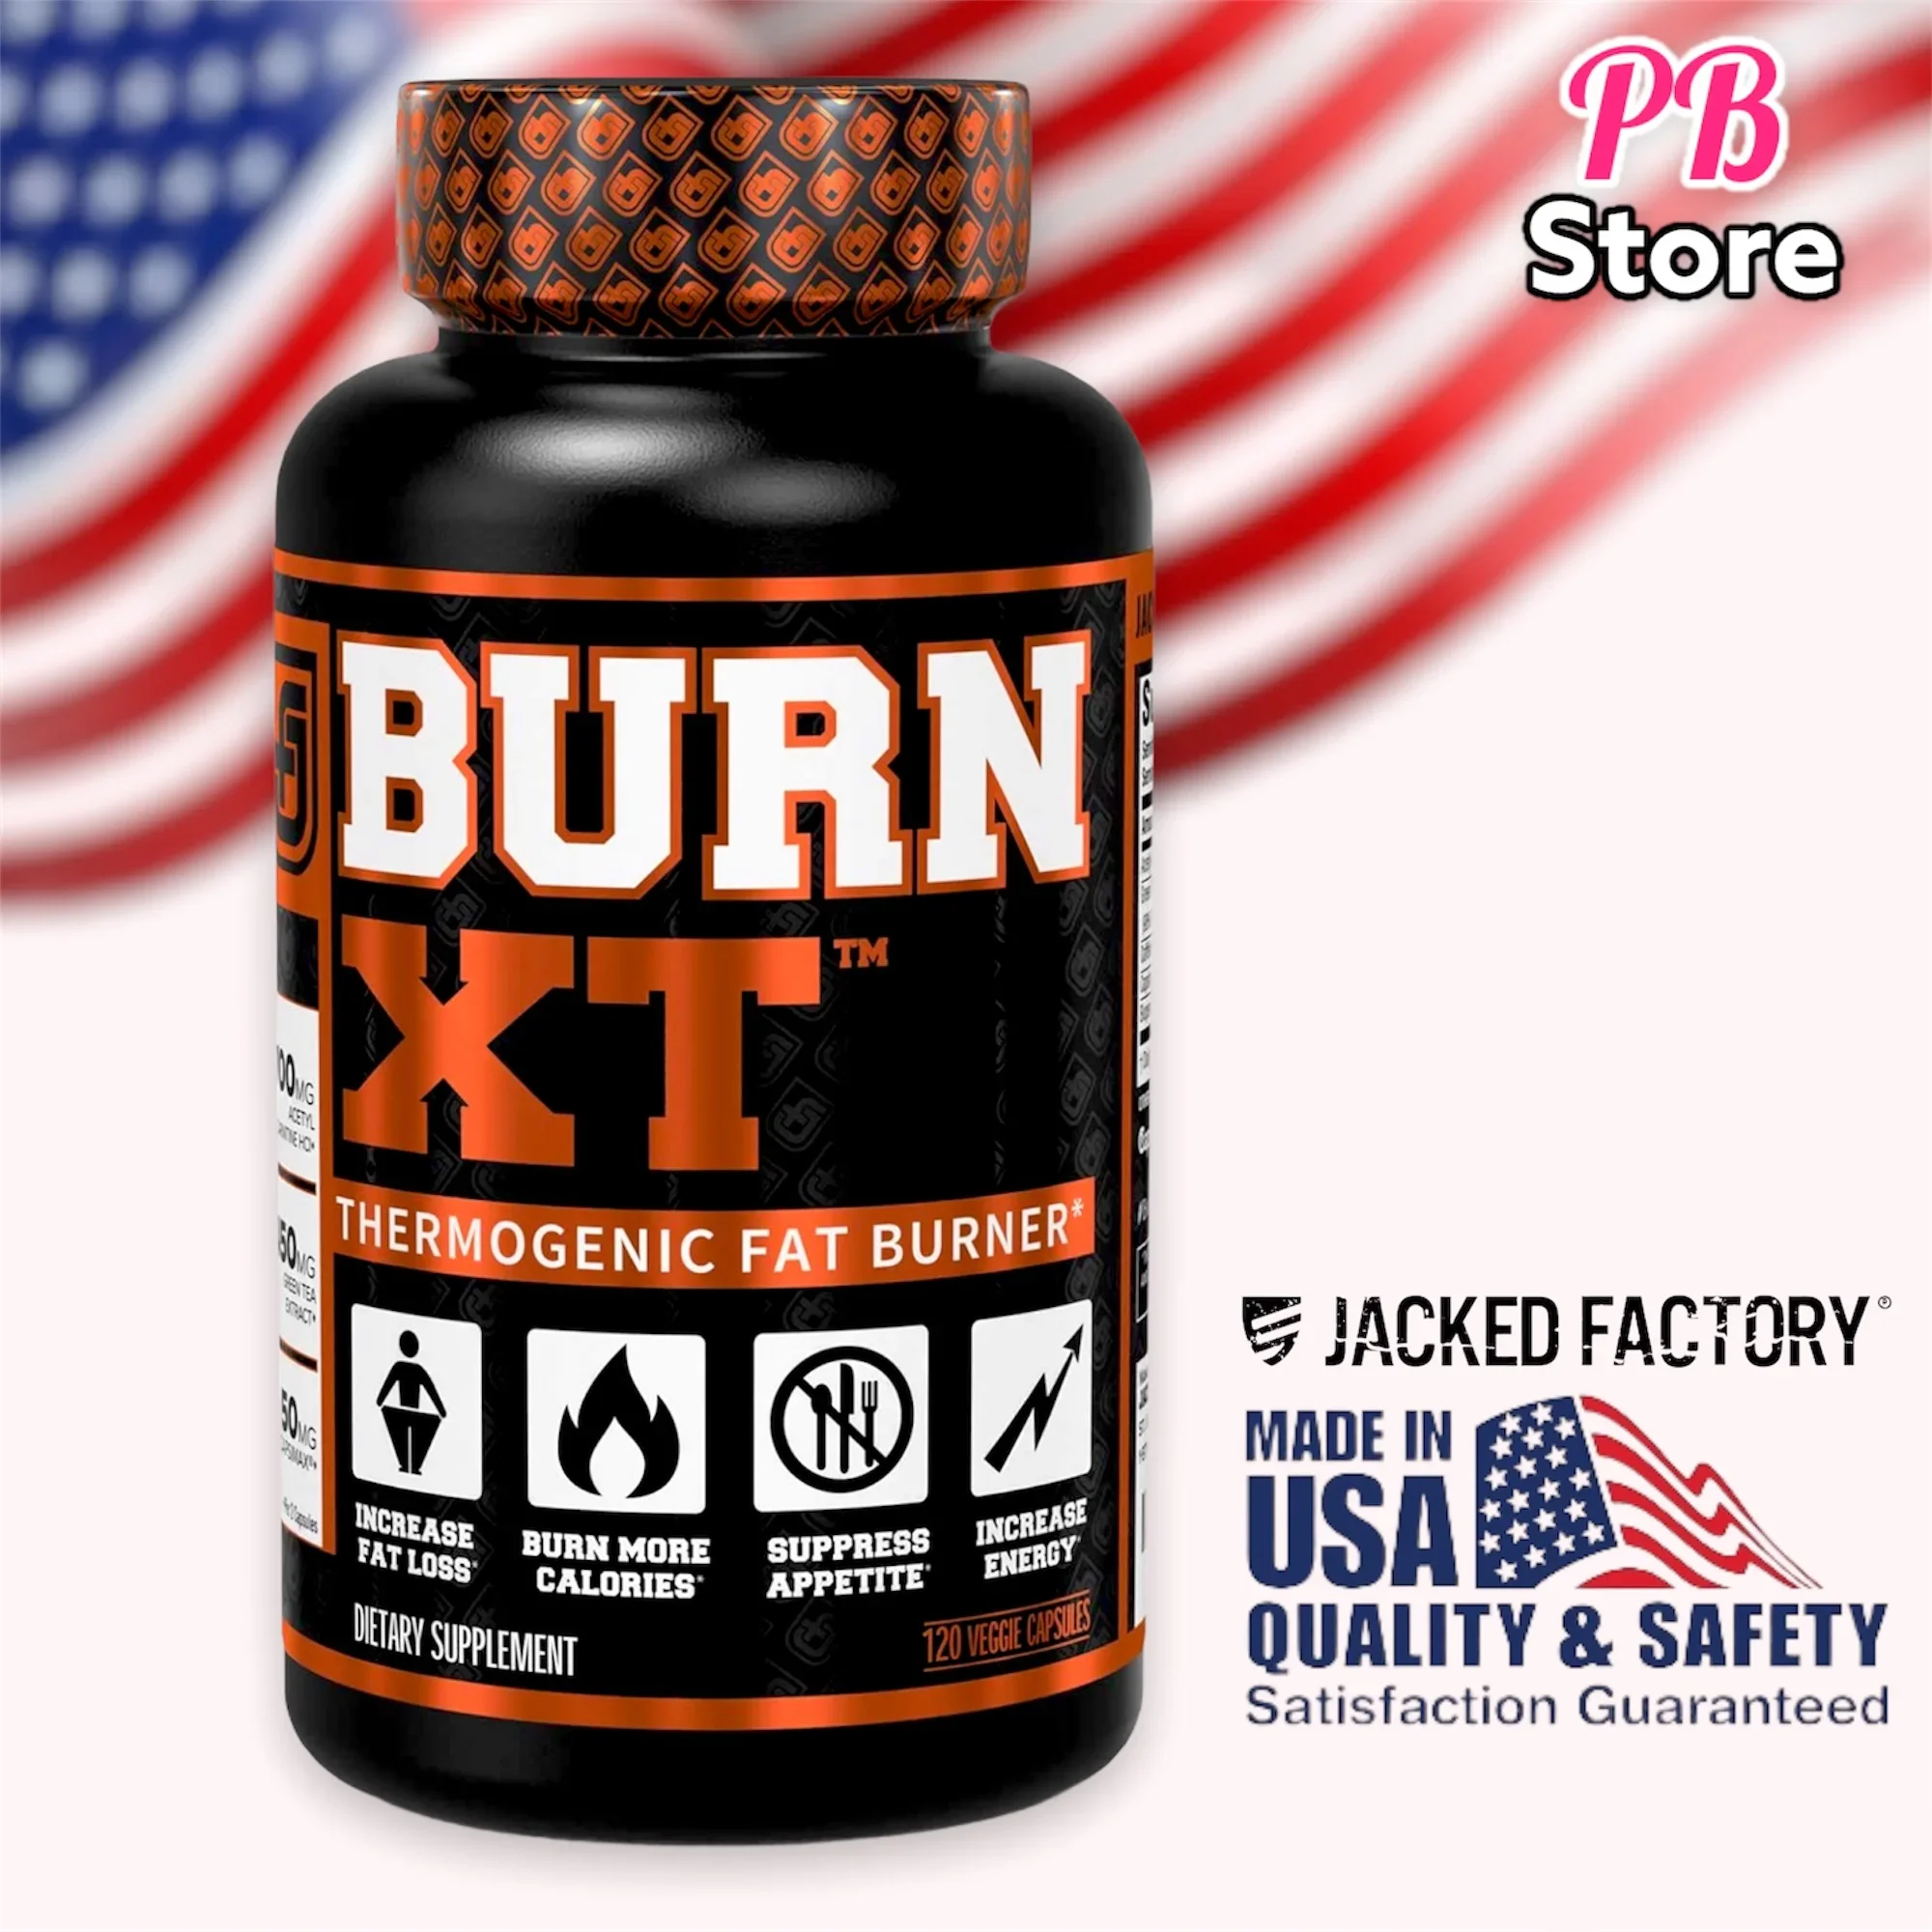 Burn-XT Thermogenic Fat Burner - Weight Loss Supplement, Appetite Suppressant, & Energy Booster